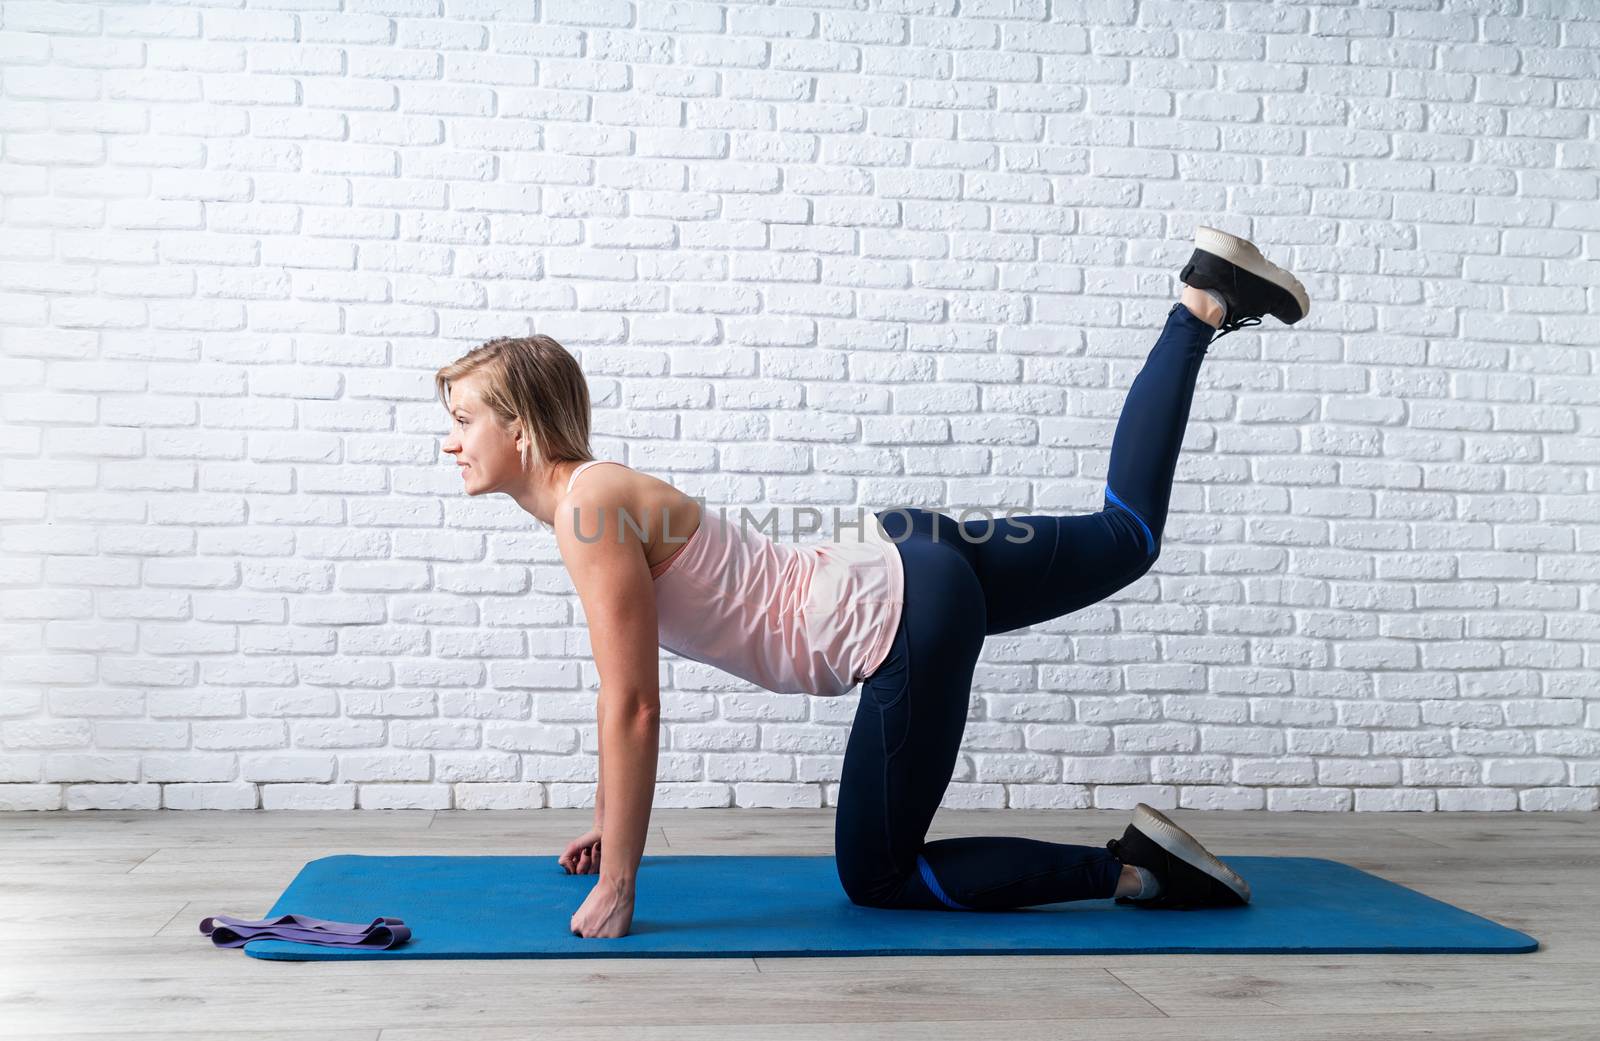 Stay home. Home fitness. Smiling young sportswoman doing the exercises on all fours arching back straightening leg up indoors